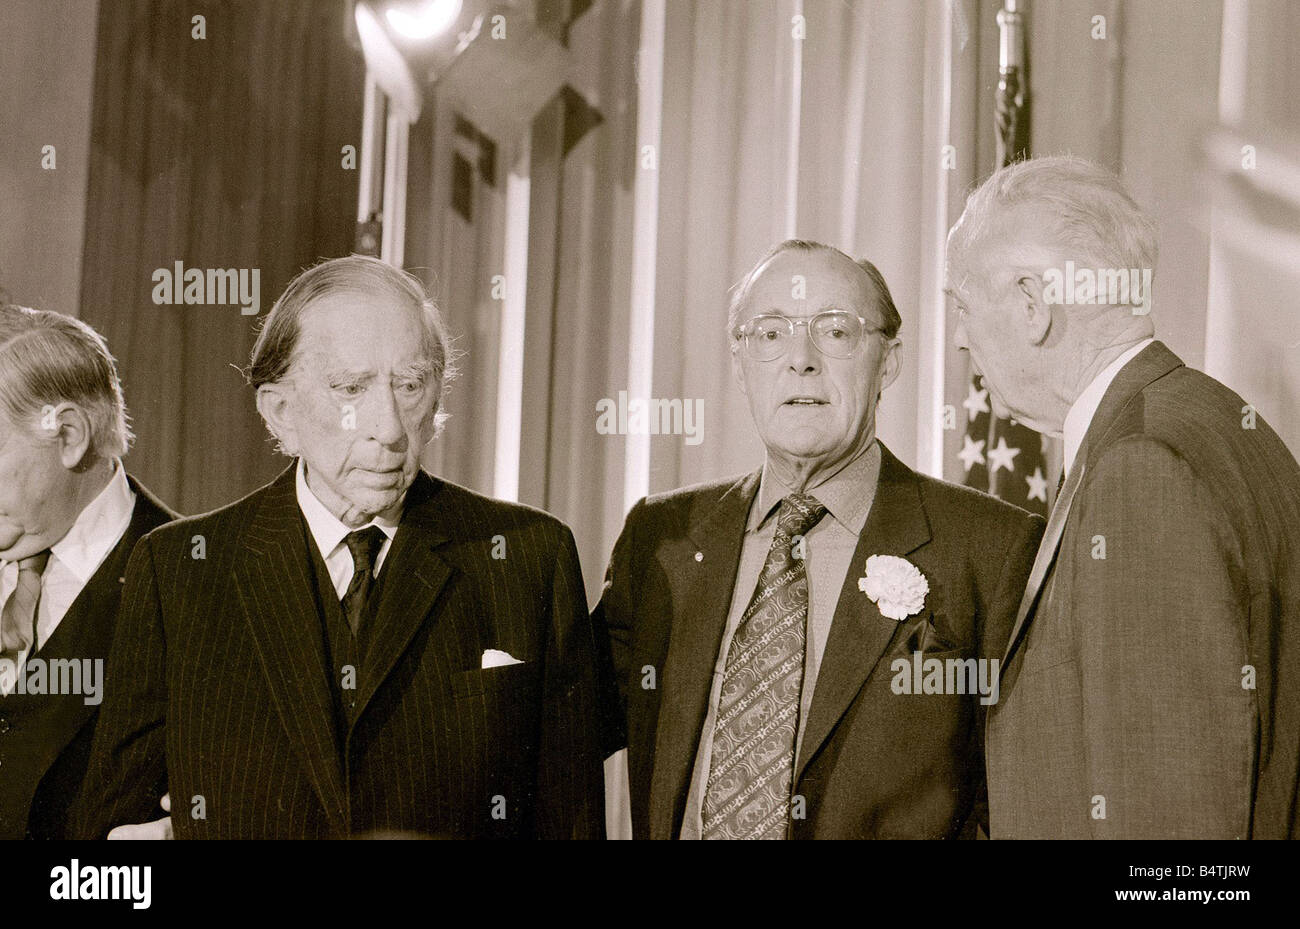 John Paul Getty Oil Billionaire gives 20 000 to the world wildlife fund seen here with Prince Bernhard and Charles Lindbergh at Stock Photo